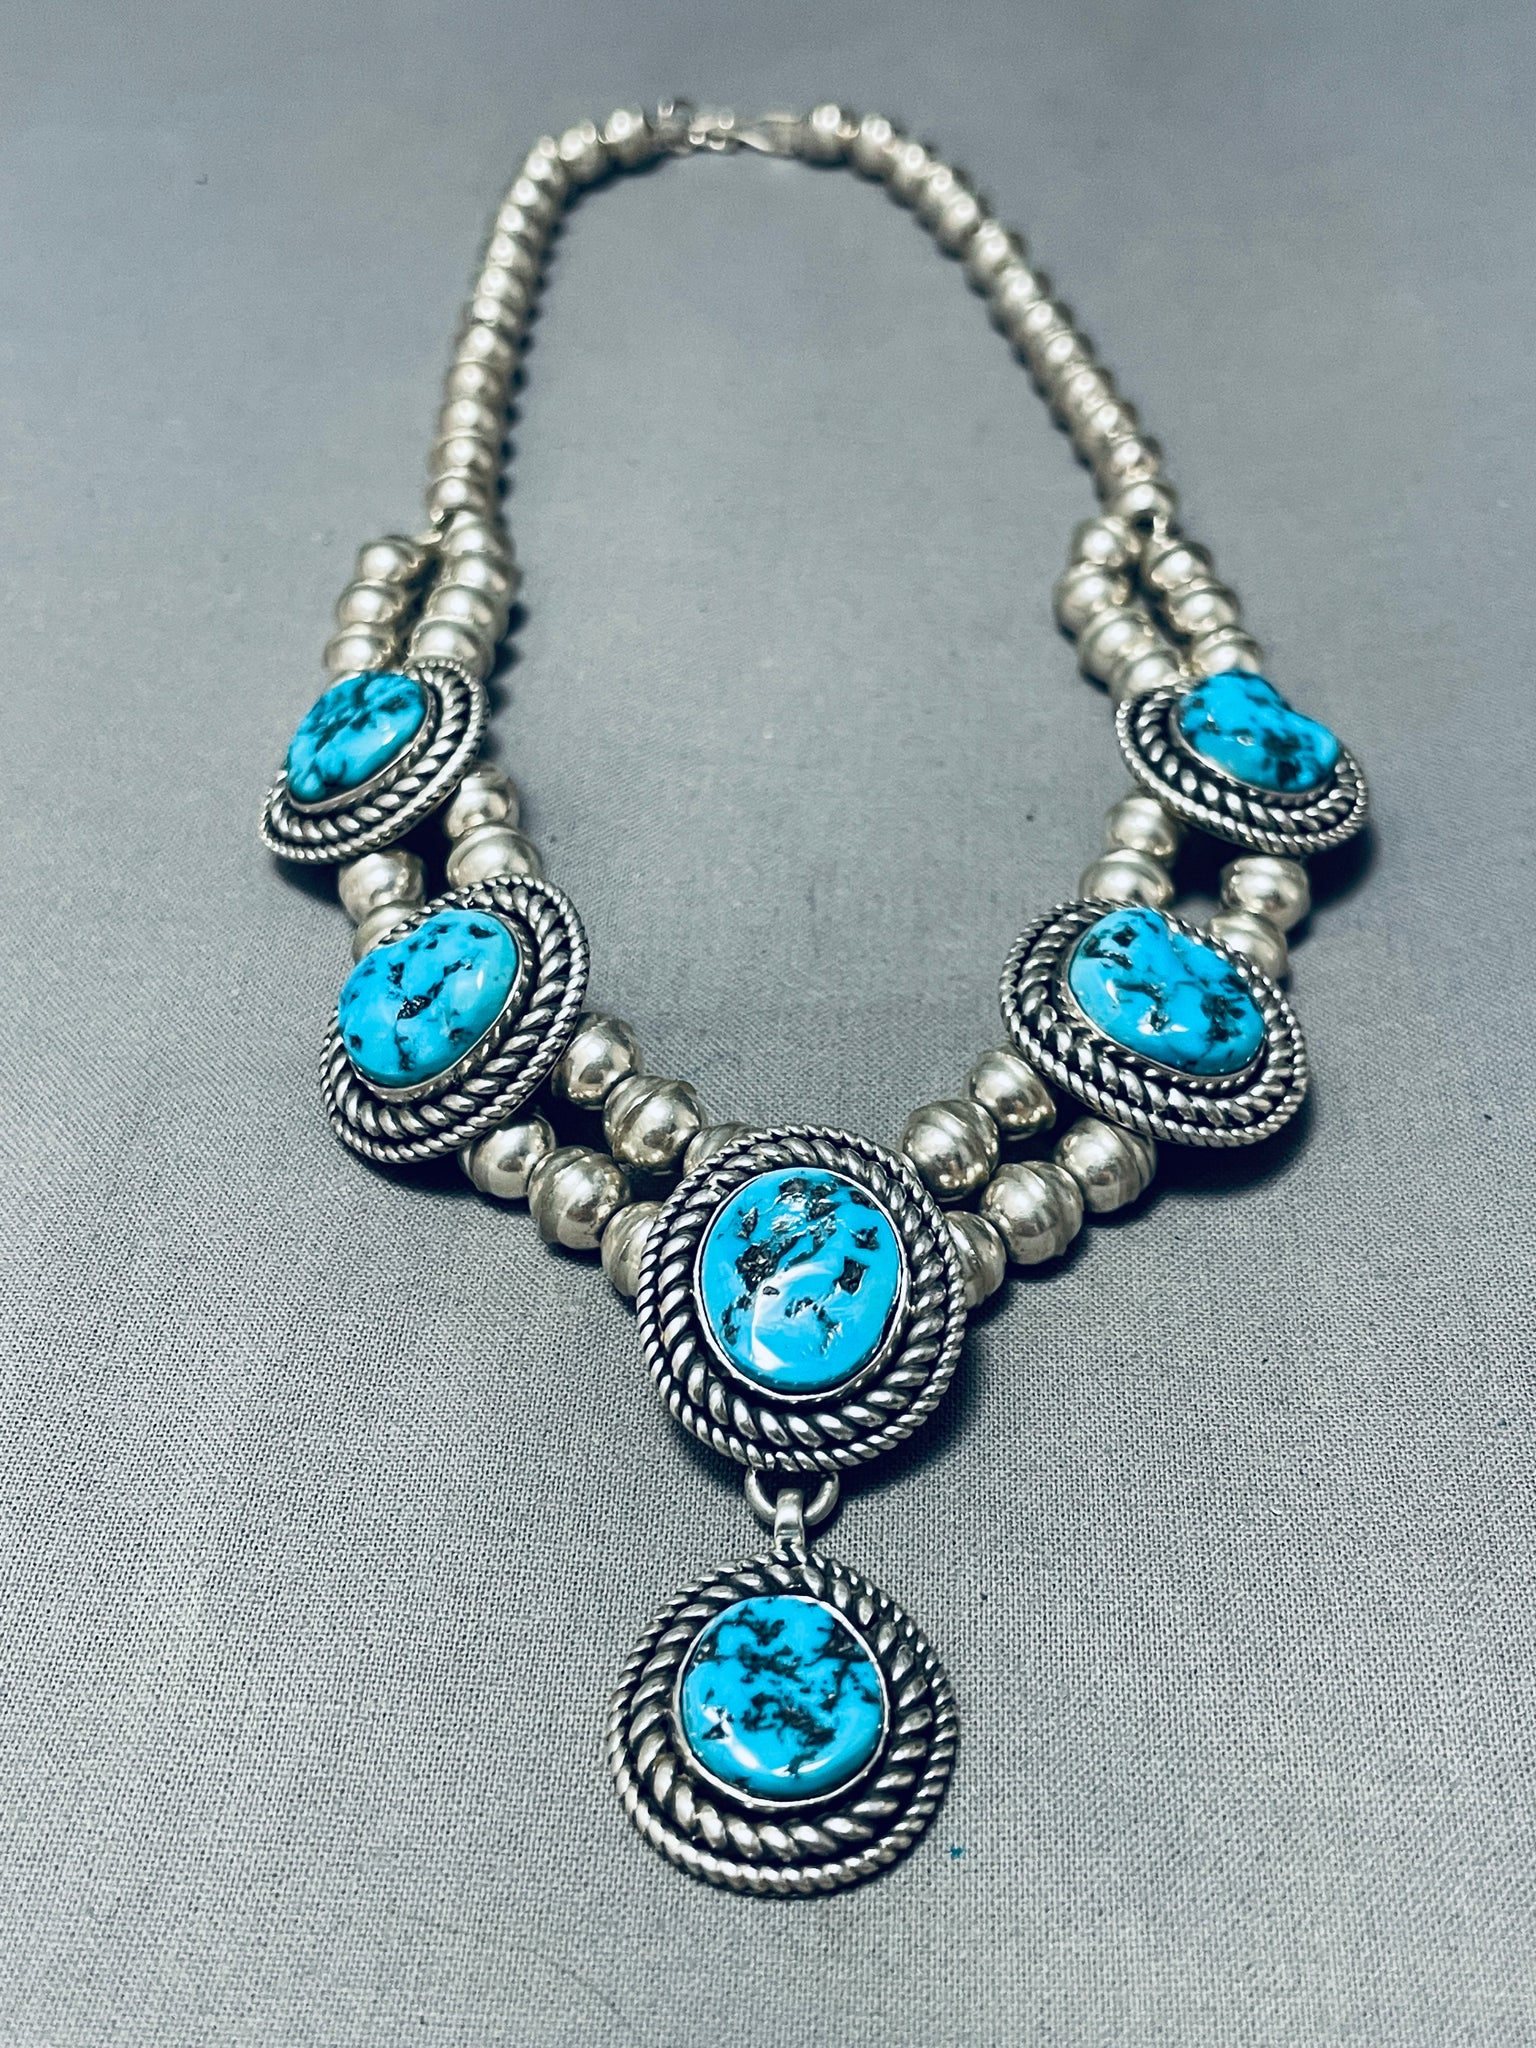 Item #1025A- Navajo Sleeping Beauty Turquoise Stamped/Textured Sterling Silver Variety Beaded Necklace by Em Teller